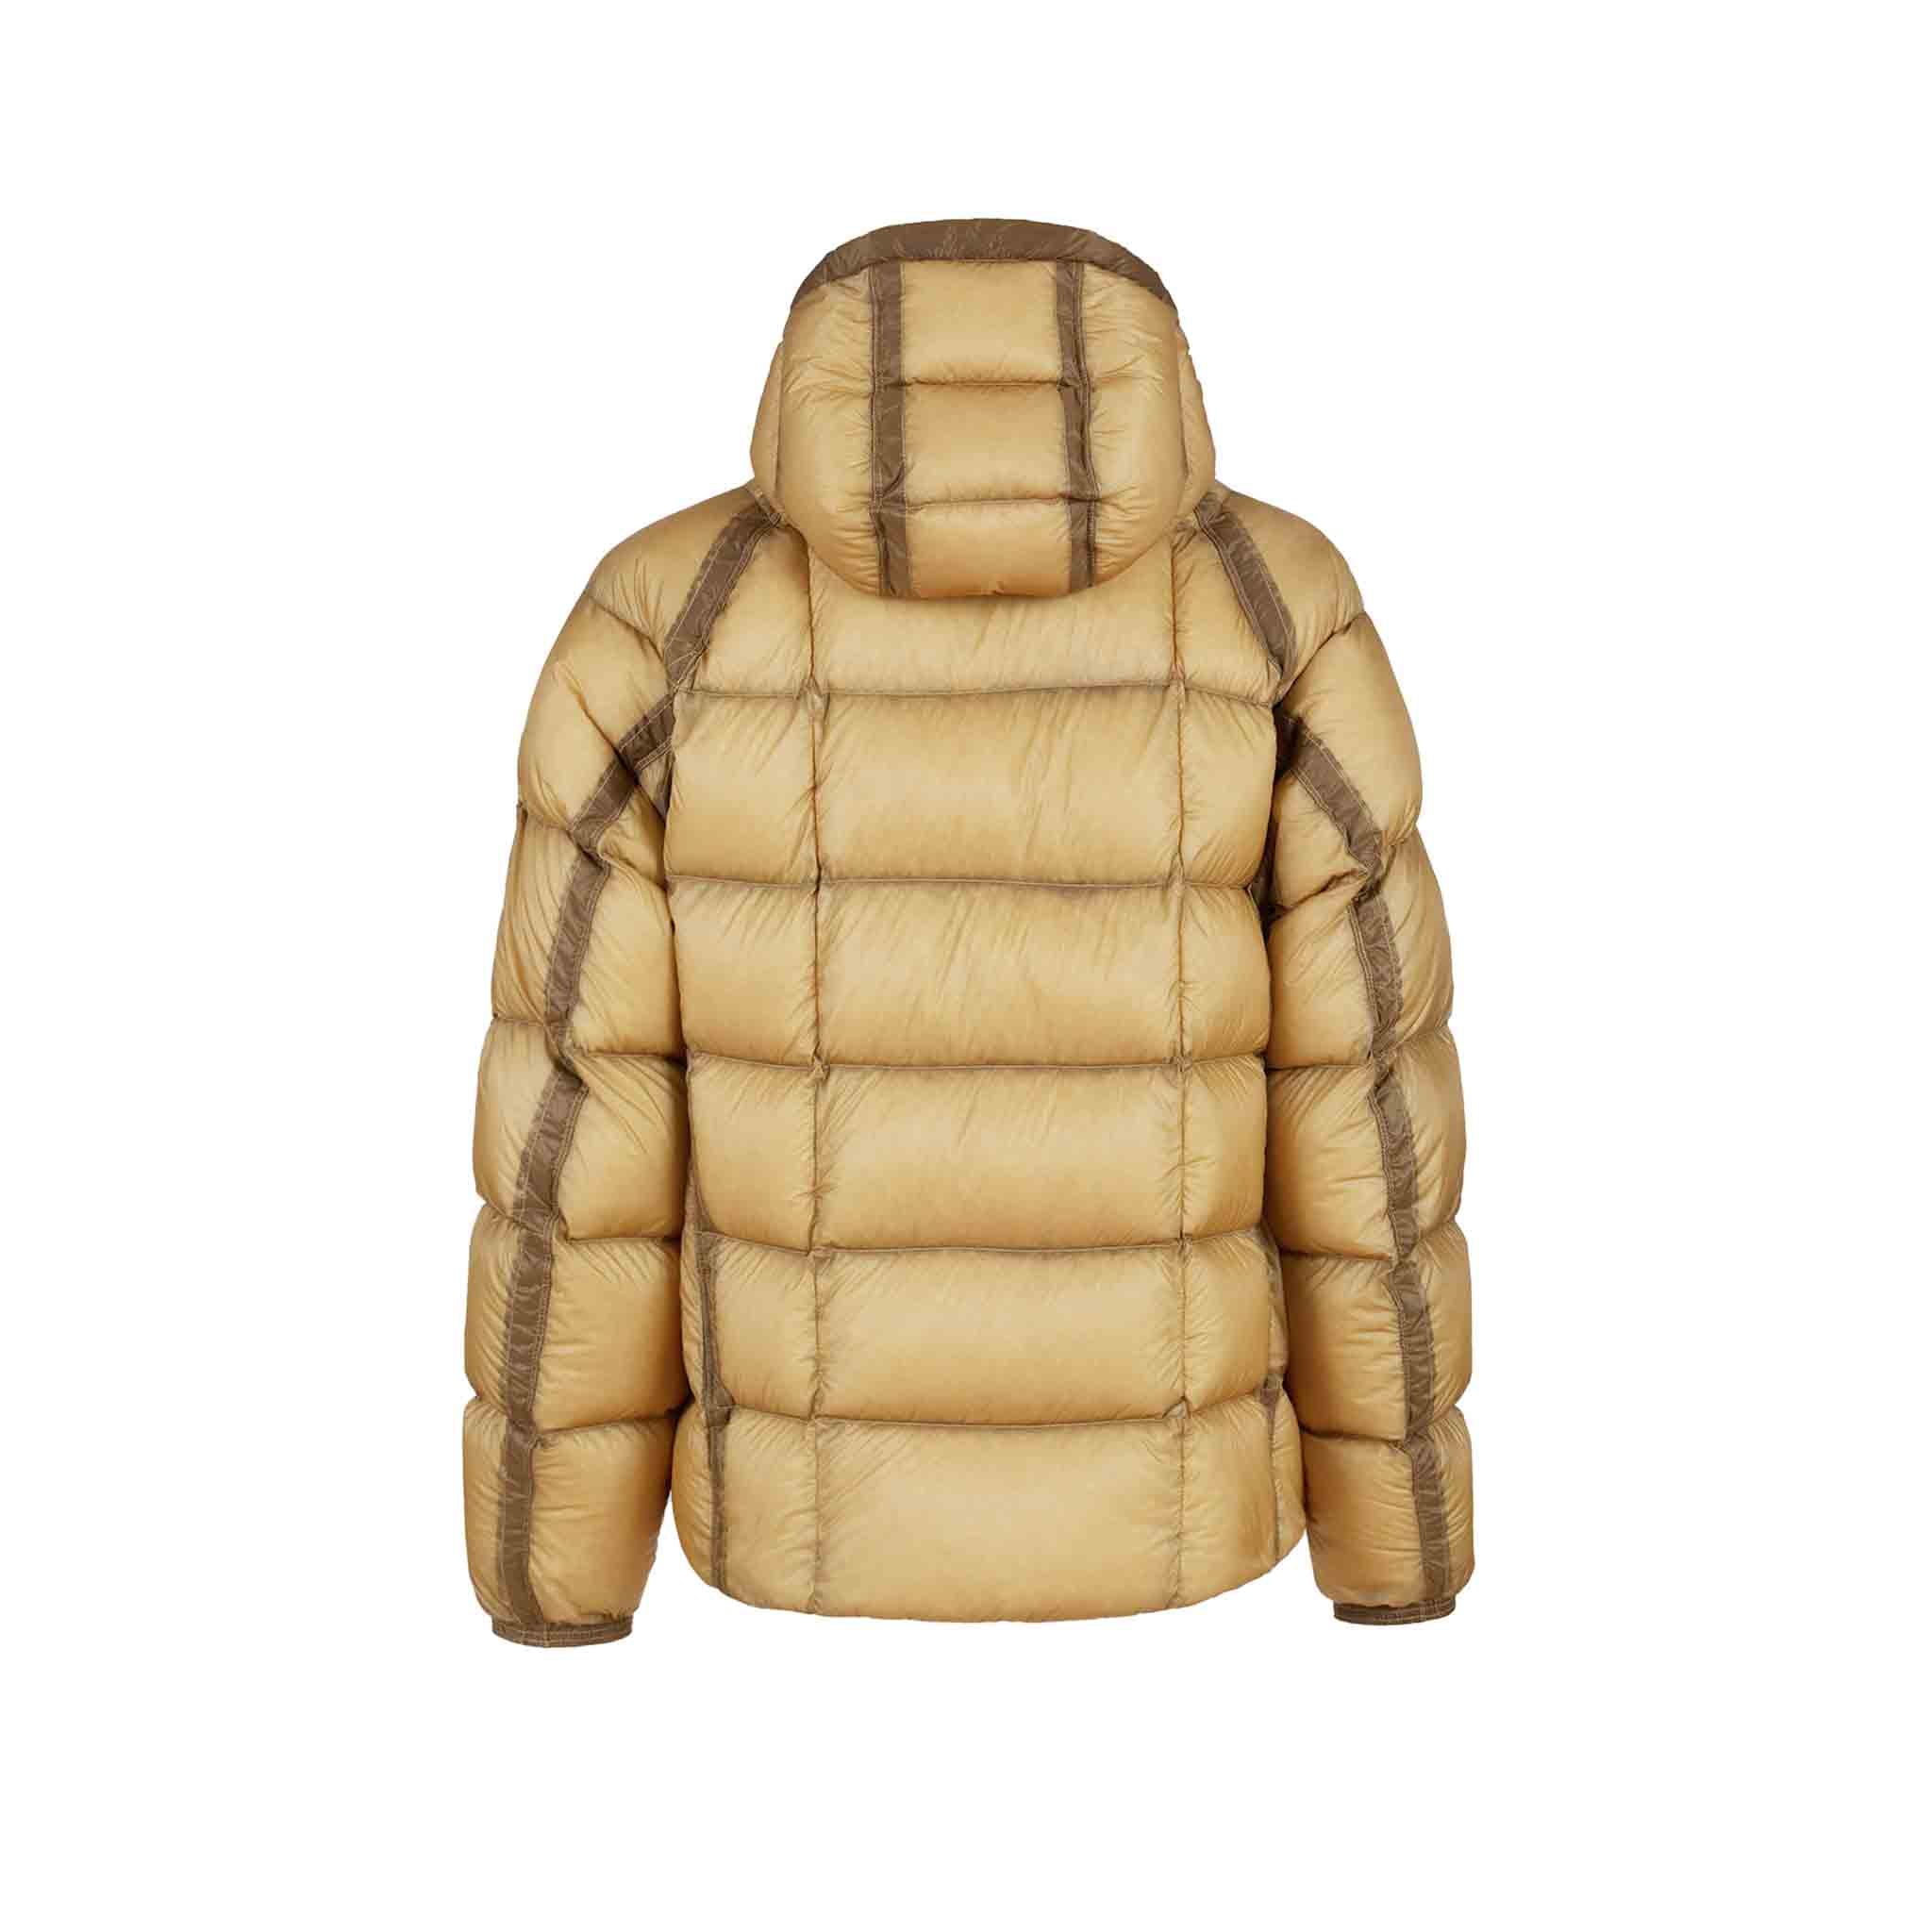 C.P. Company D.D. Shell Hooded Down Jacket in Mojade Desert- Yellow